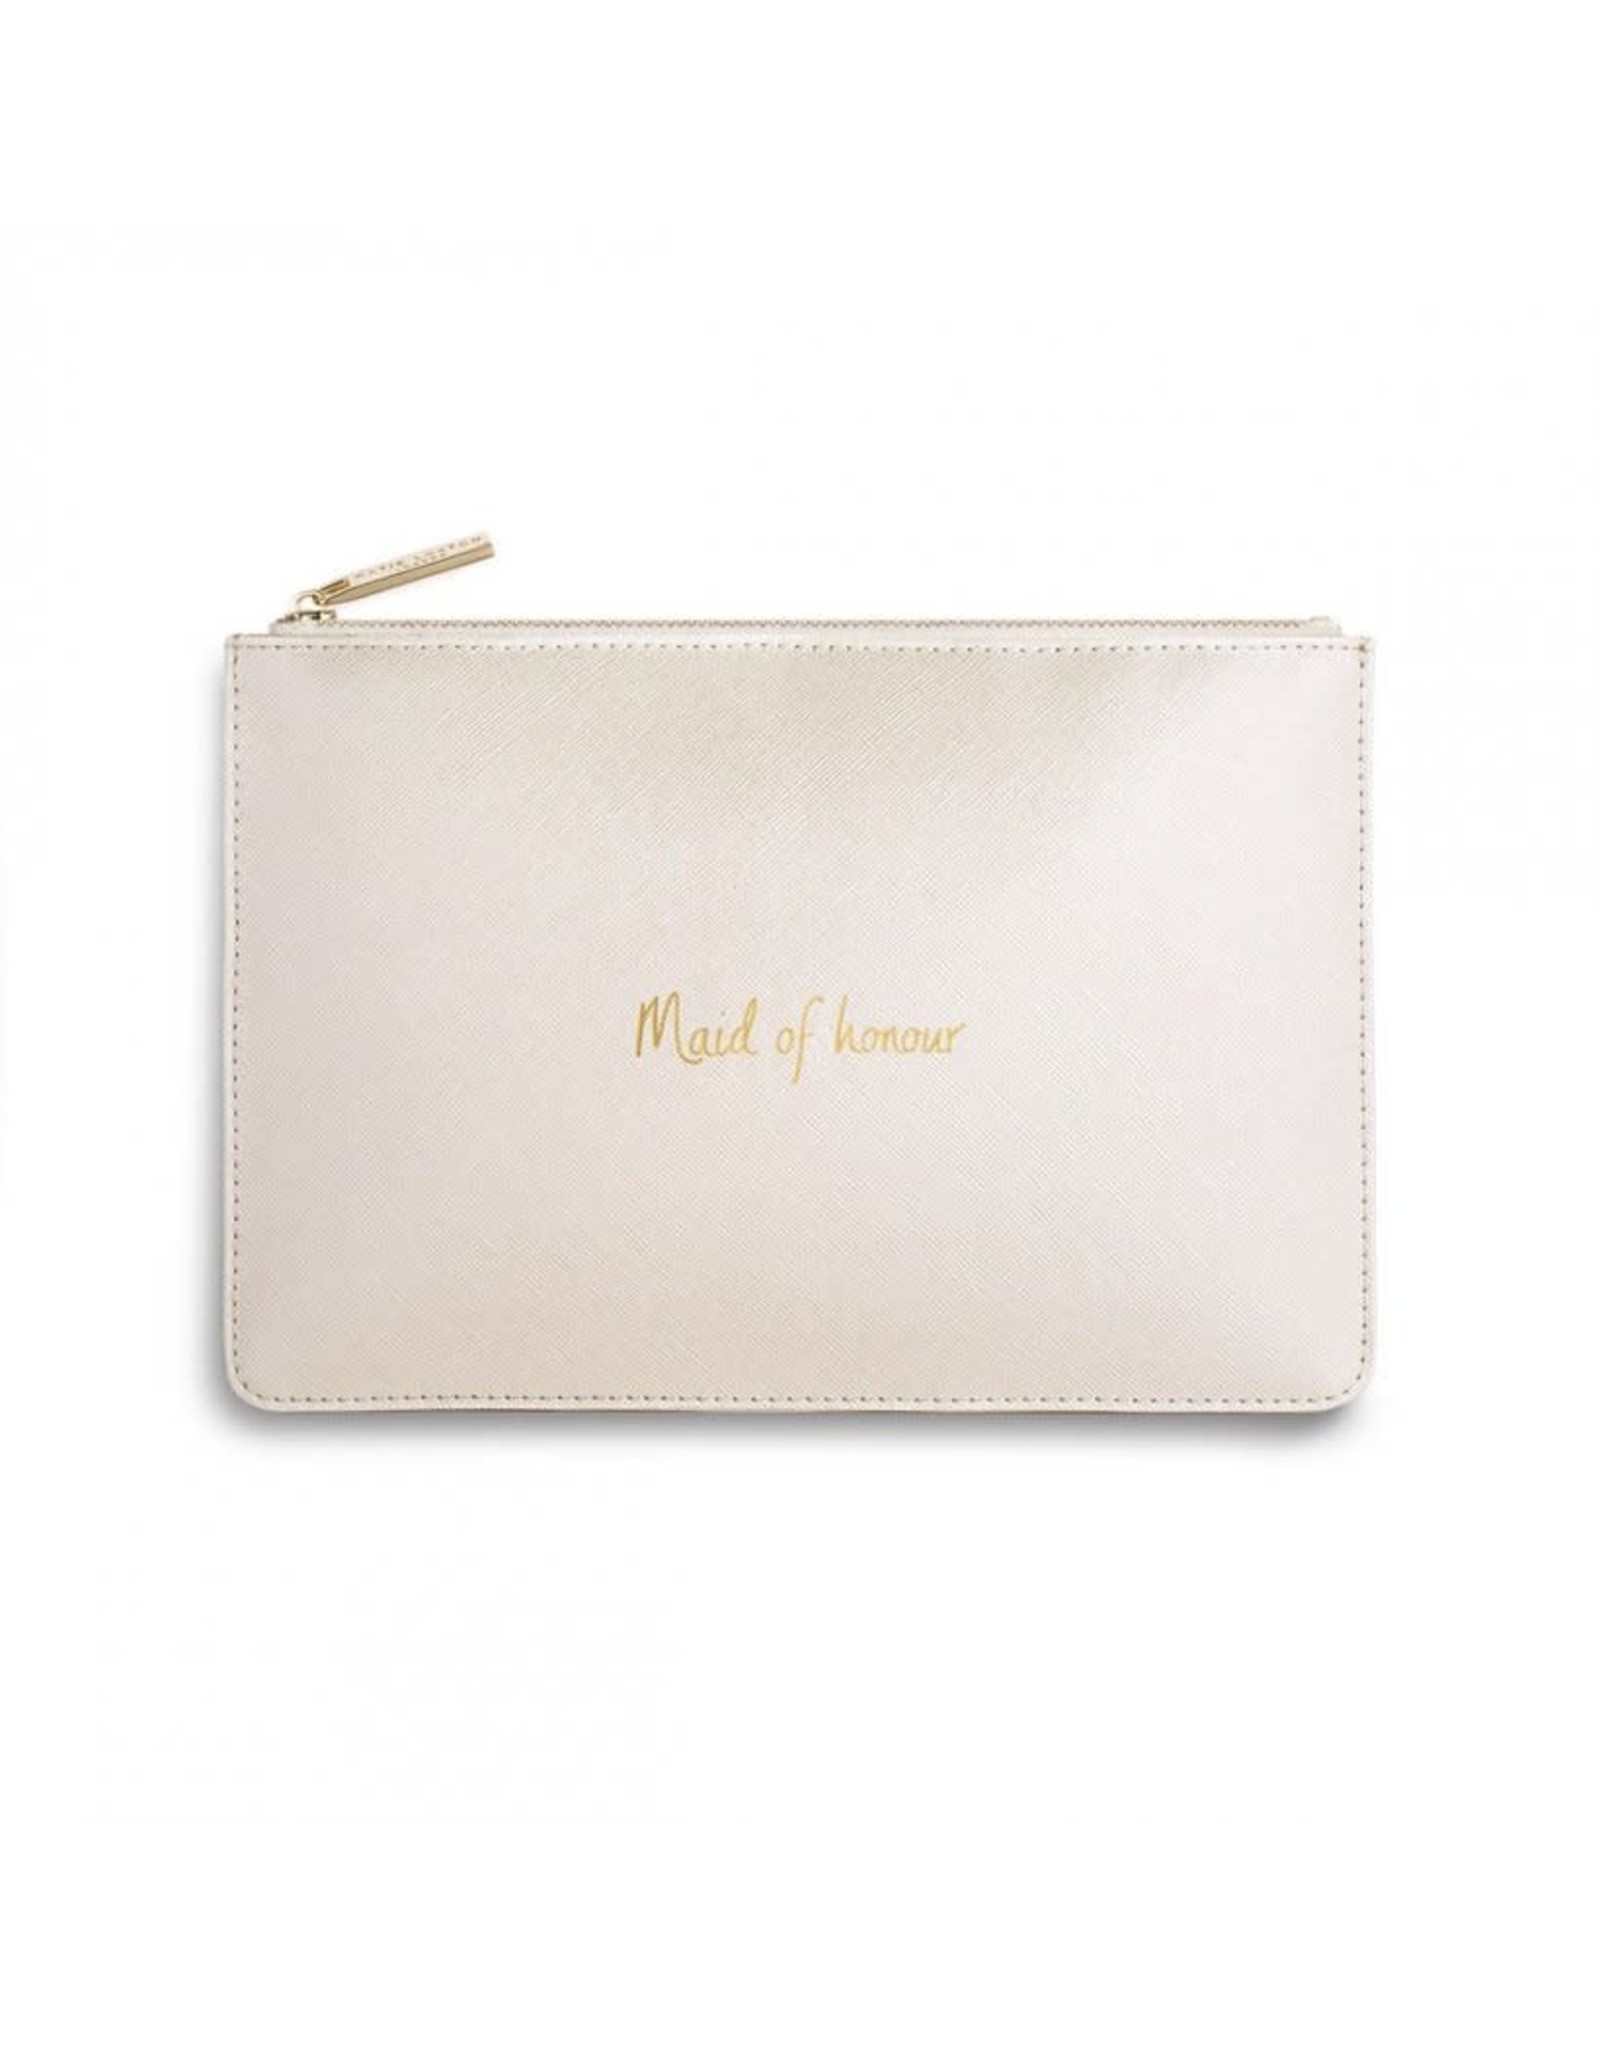 KATIE LOXTON MAID OF HONOR POUCH MTLC WHITE